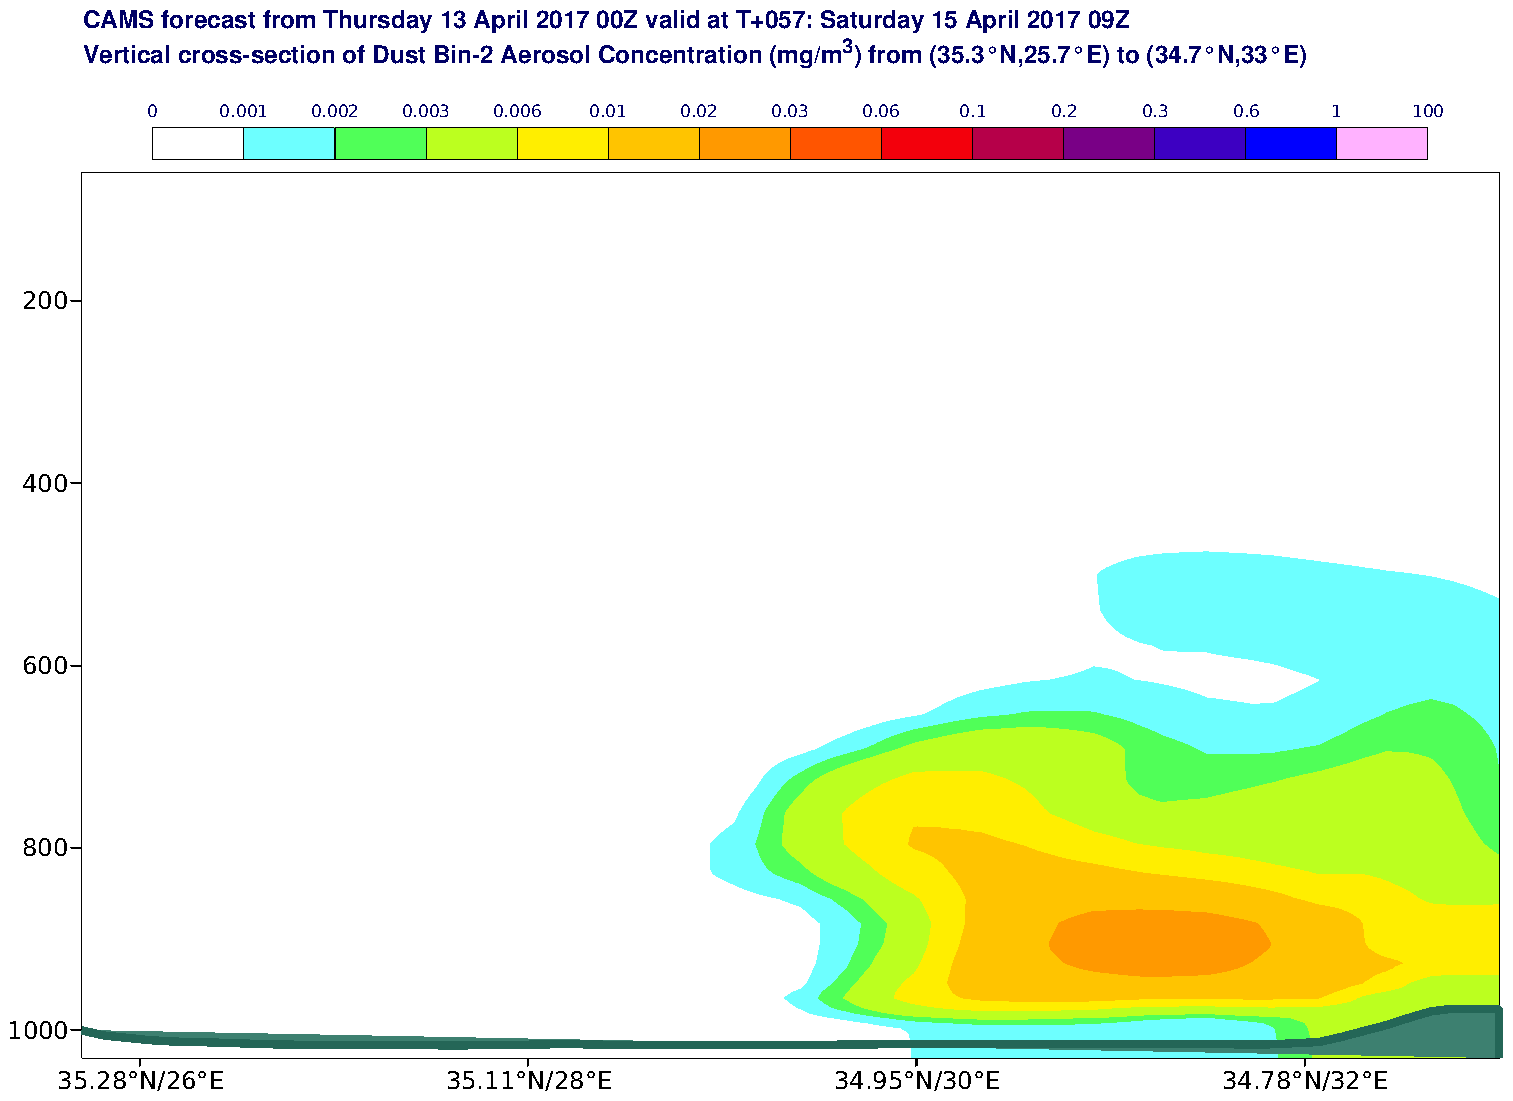 Vertical cross-section of Dust Bin-2 Aerosol Concentration (mg/m3) valid at T57 - 2017-04-15 09:00